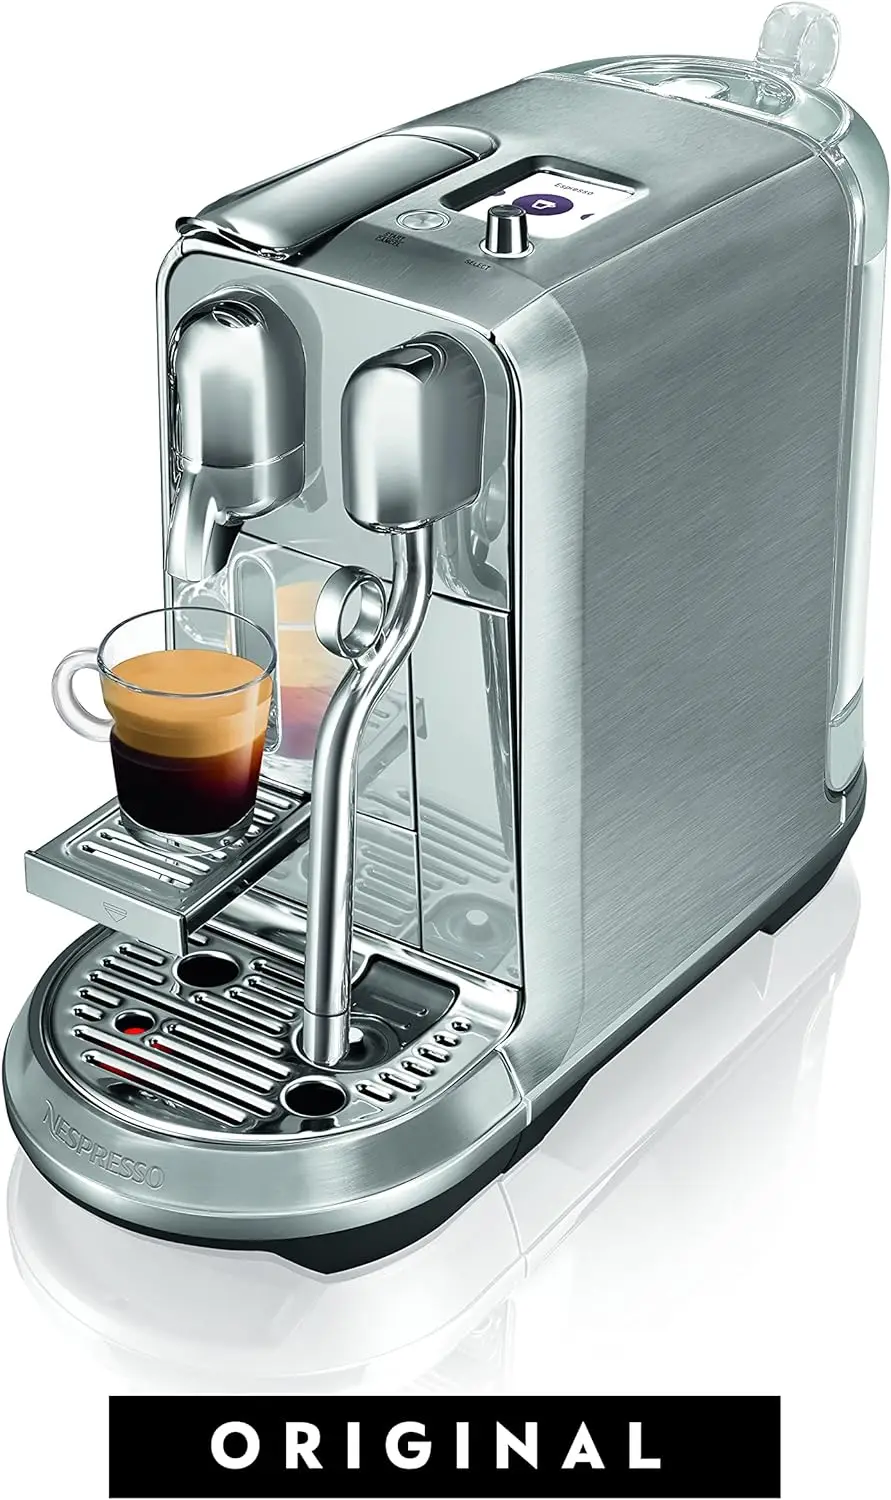 

Breville Nespresso Creatista Plus BNE800BSS, Brushed Stainless Steel